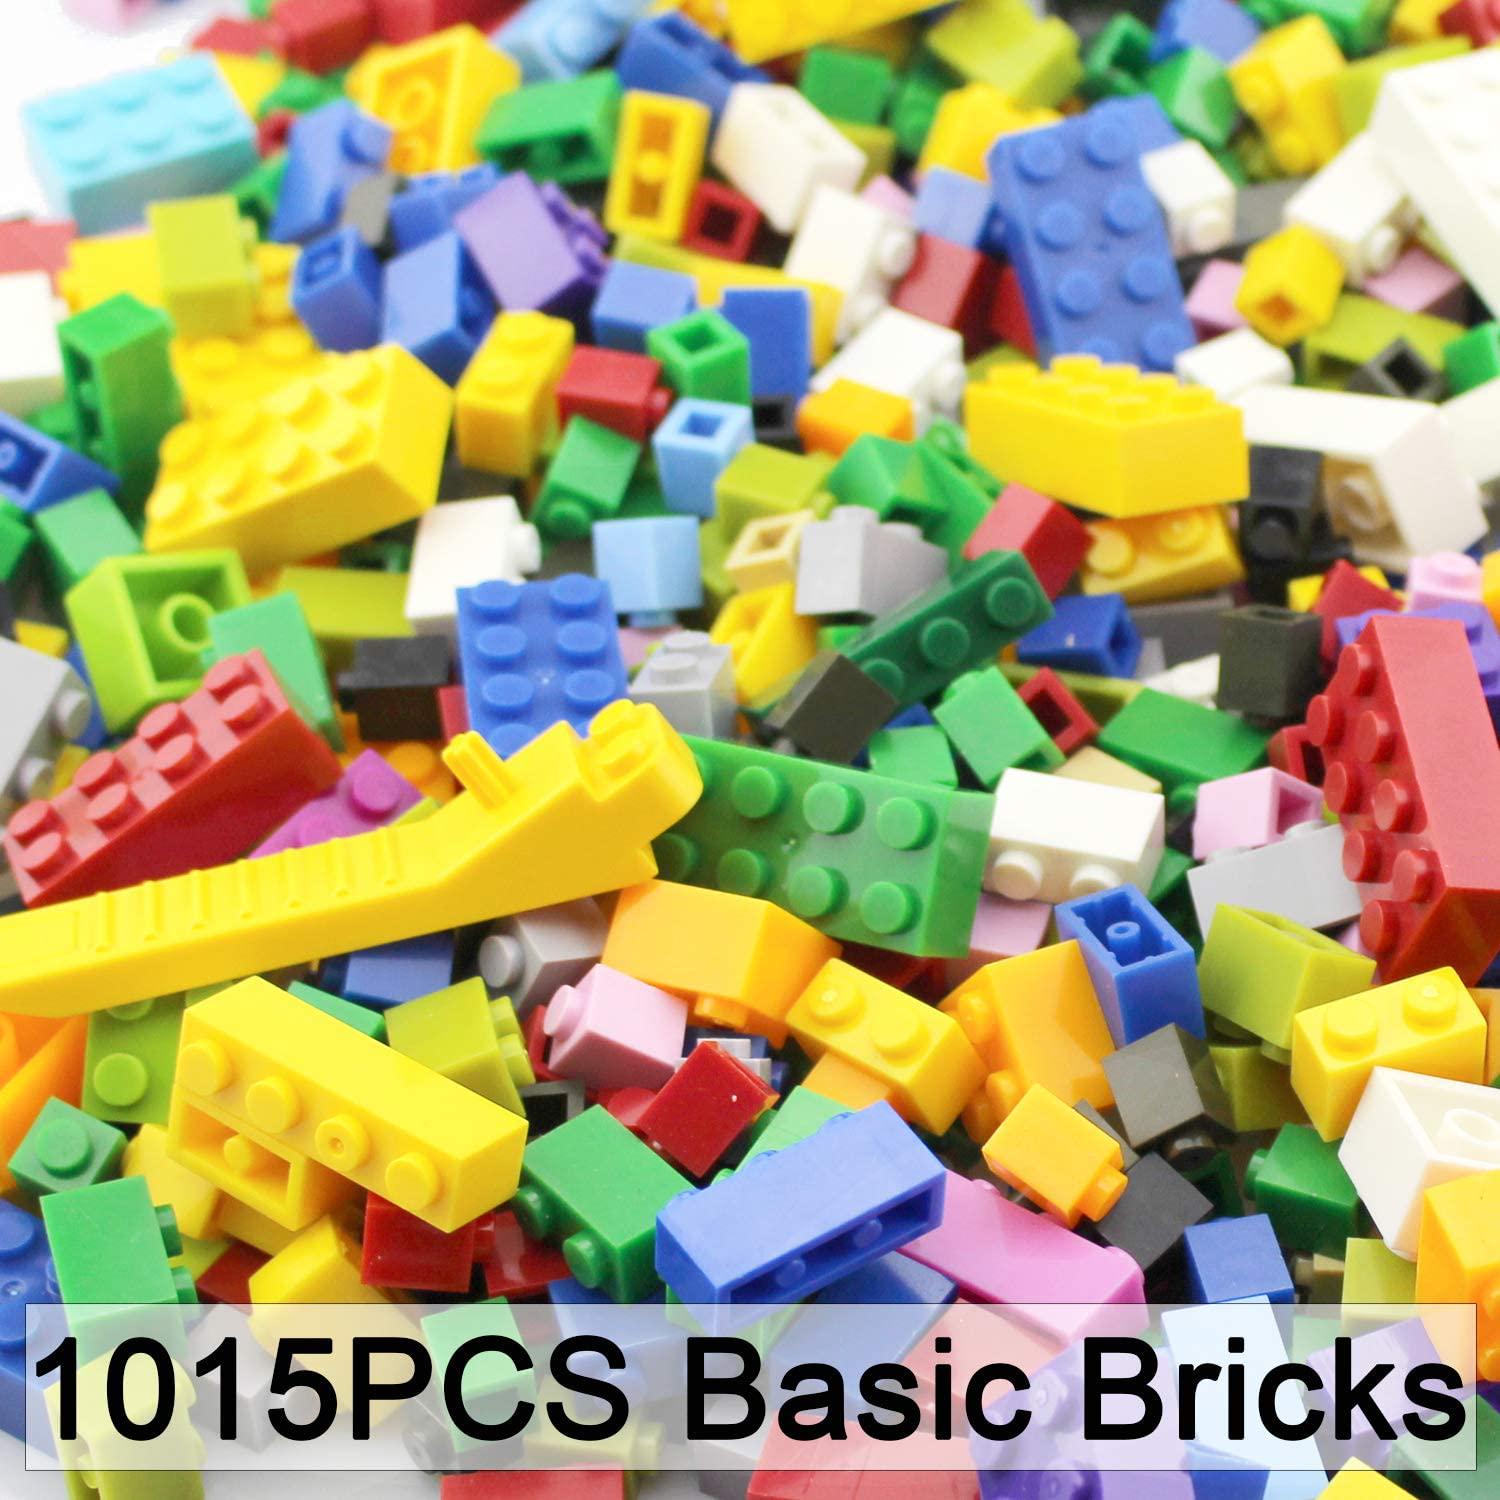 MARUMINE, MARUMINE Classic Building Bricks 1325 Pieces with Basic Blocks, Baseplate, Door, Roof, Plant, STEM Toys Construction Blocks Toy Starter Set for Boys Grils 6+, Compatible with All Major Brands